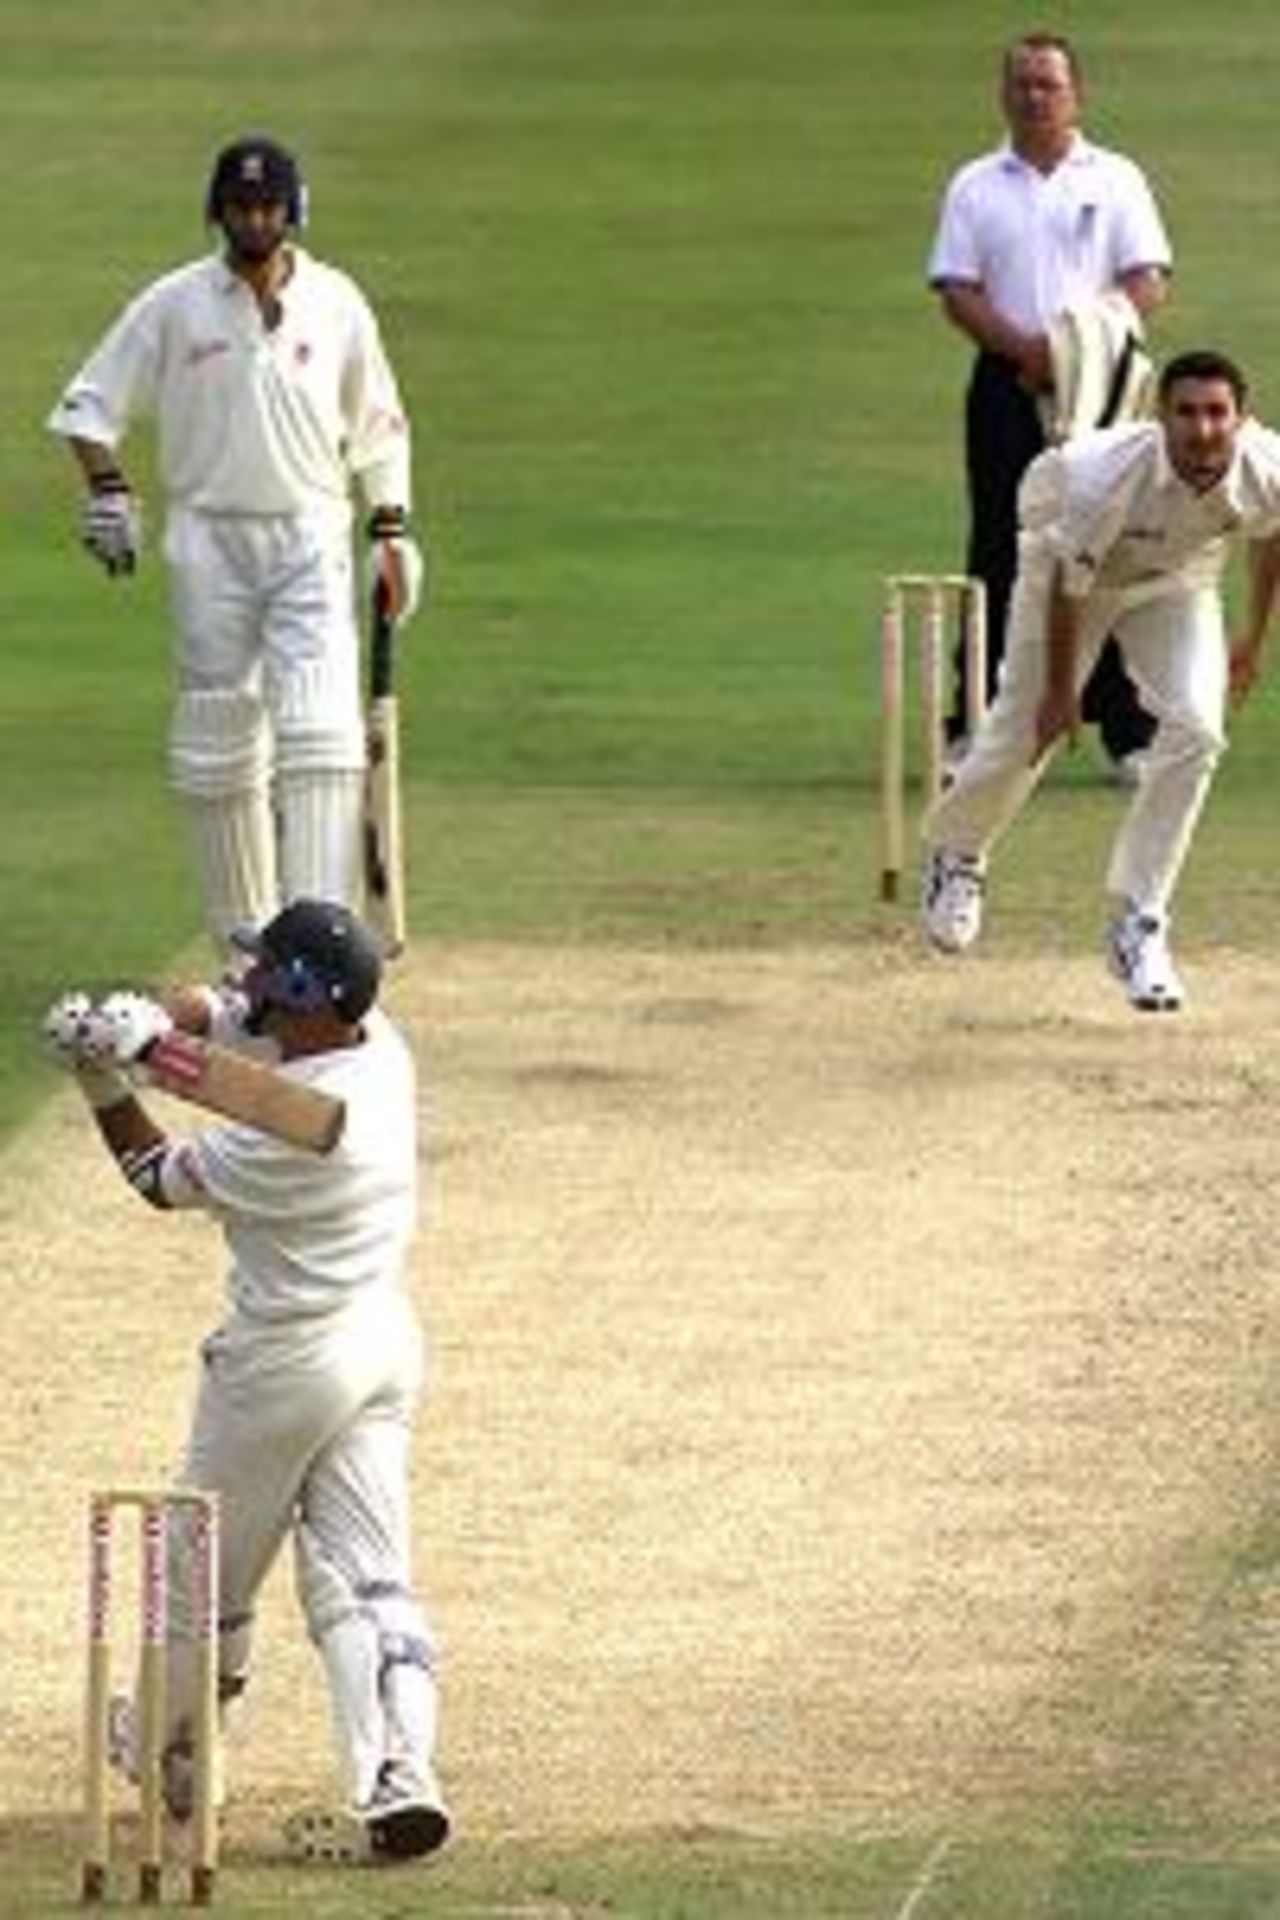 Nasser Hussain of Essex hits a six from the bowling of Jason Gillespie of Australia, during day one of the tour match between Essex and Australia, played at the County Ground, Chelmsford, England.